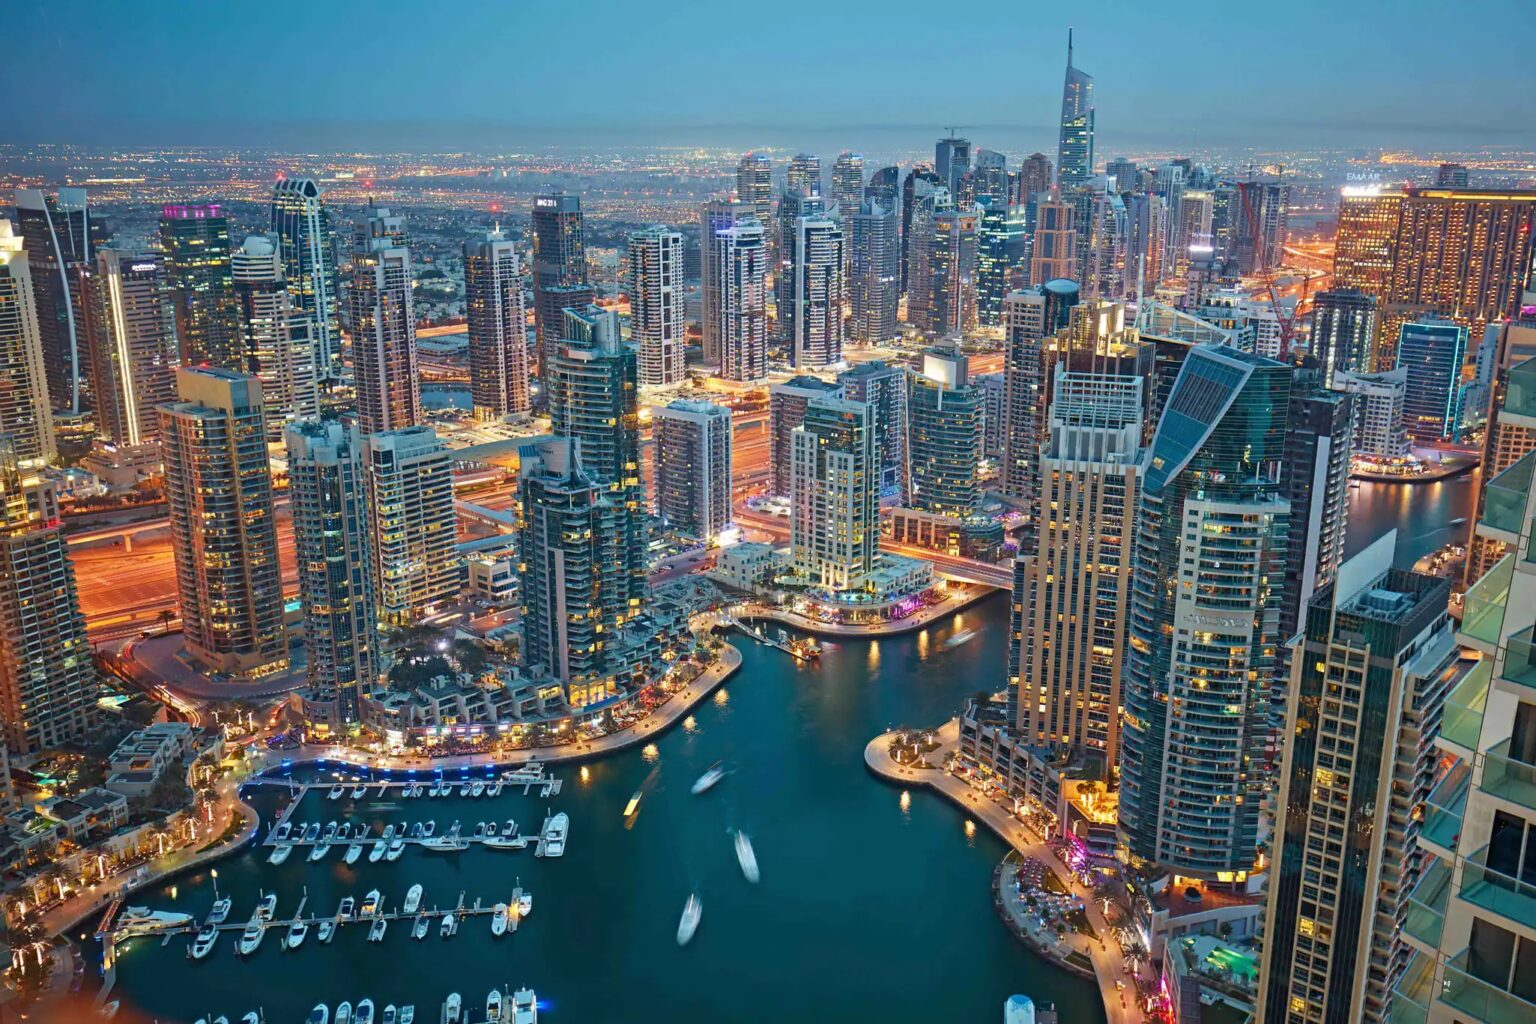 There are many famous destinations in Dubai, but here are the most popular tourist activities in Dubai.